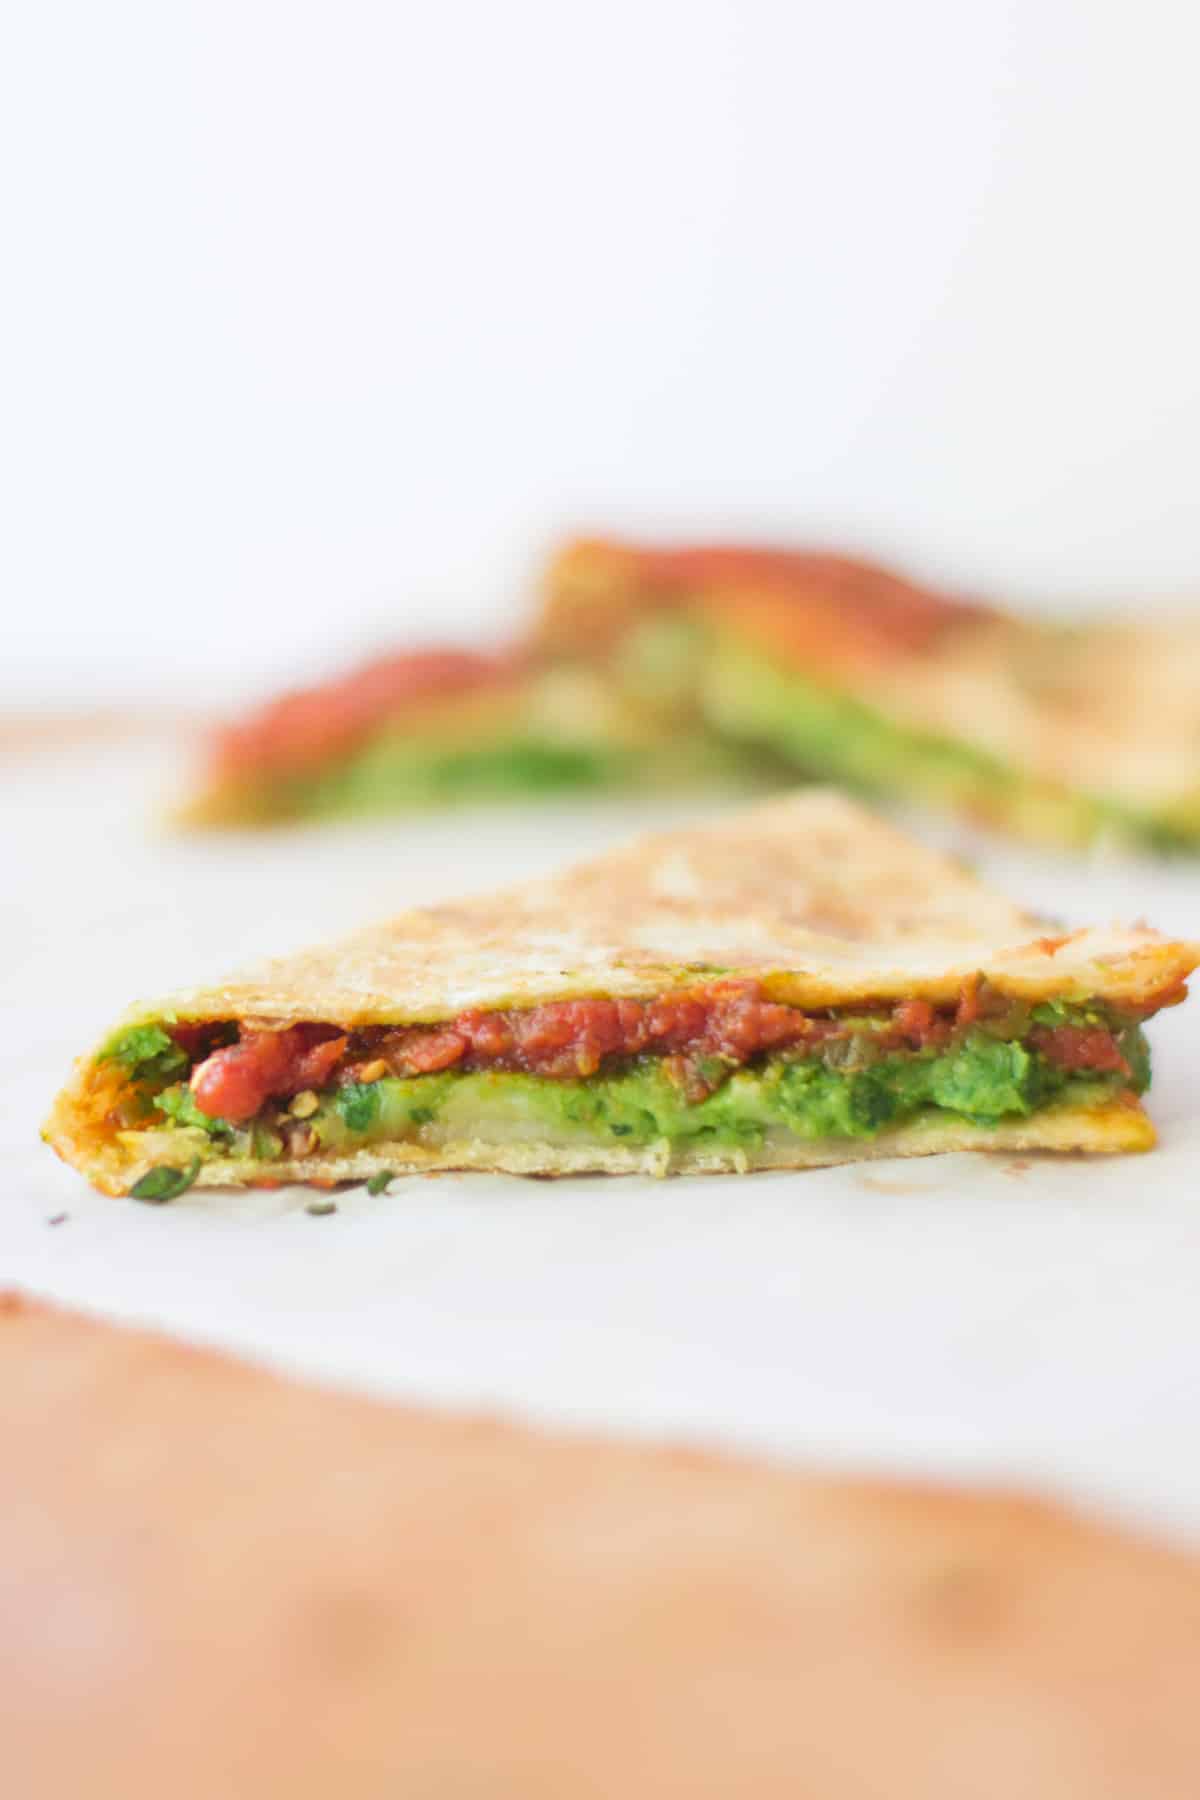 a close up shot of a cooked quesadilla triangle showcasing the filling